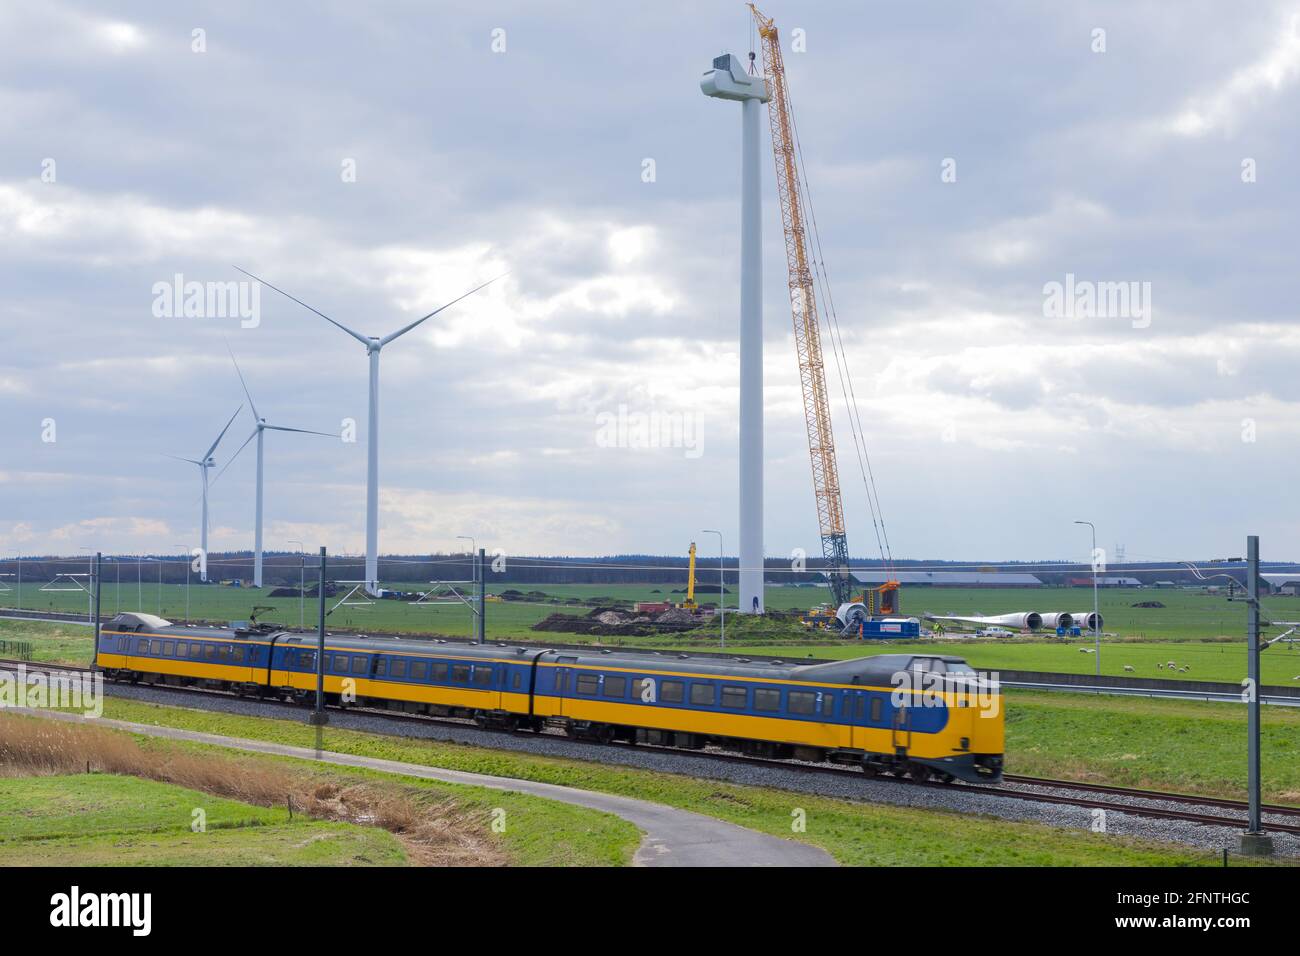 Construction of wind turbines along a railway with a train rushing by. Transport on renewable energy concept. Stock Photo